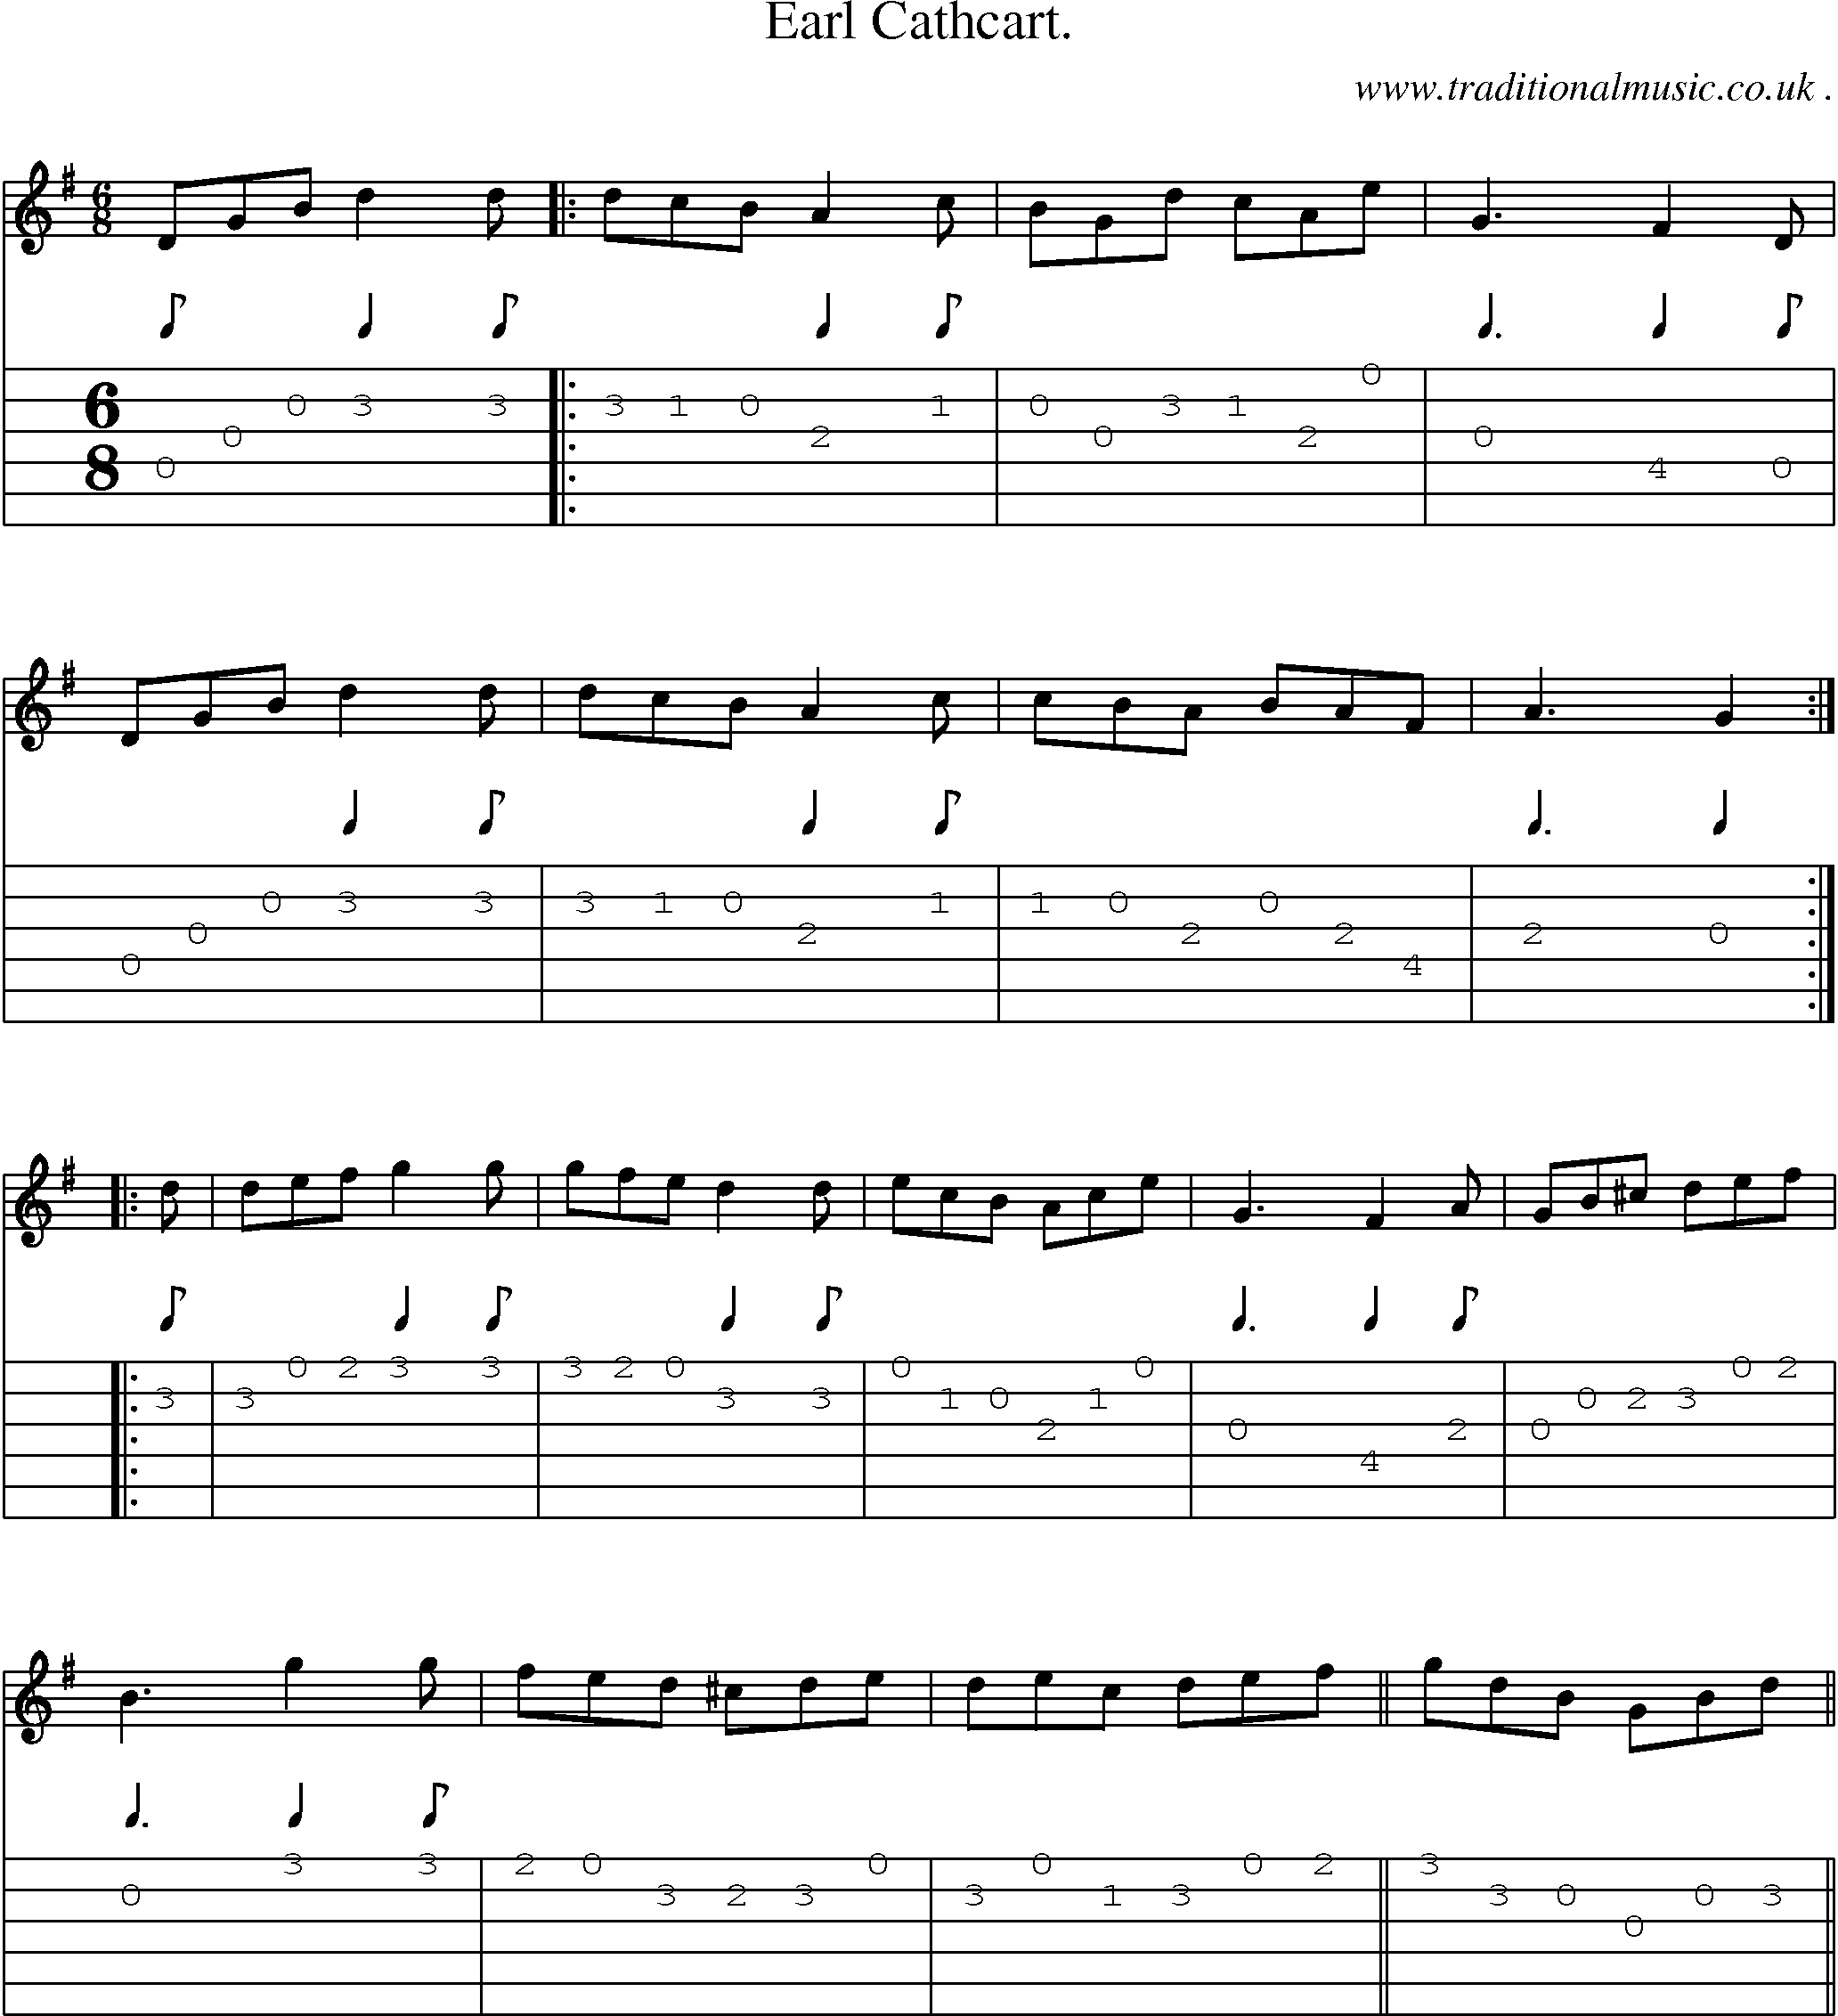 Sheet-Music and Guitar Tabs for Earl Cathcart